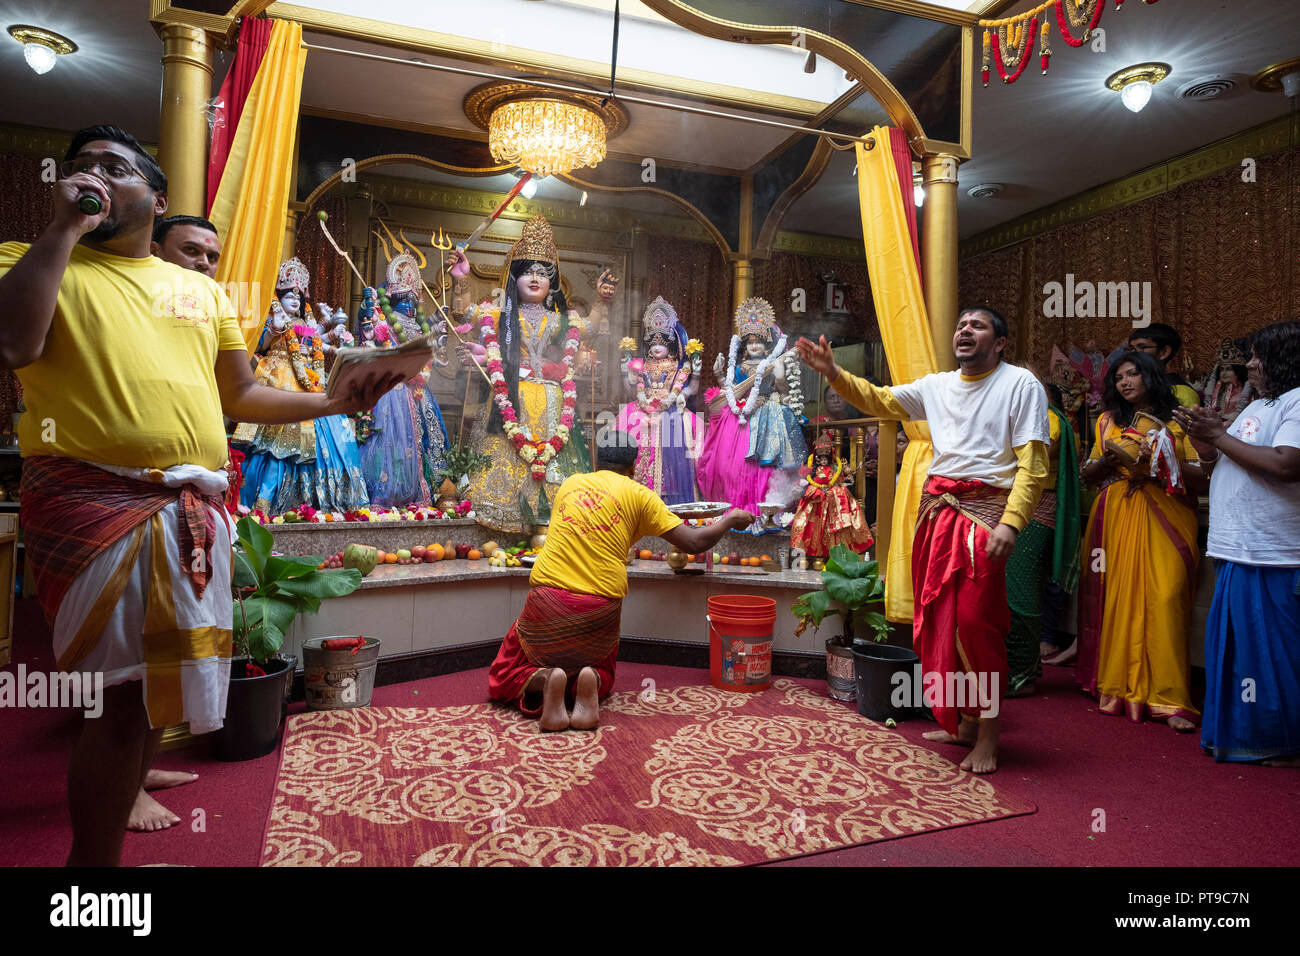 A worshipper making offering to the deities at a Hindu Mandir (temple) in Richmond Hill, Queens, New York. Stock Photo